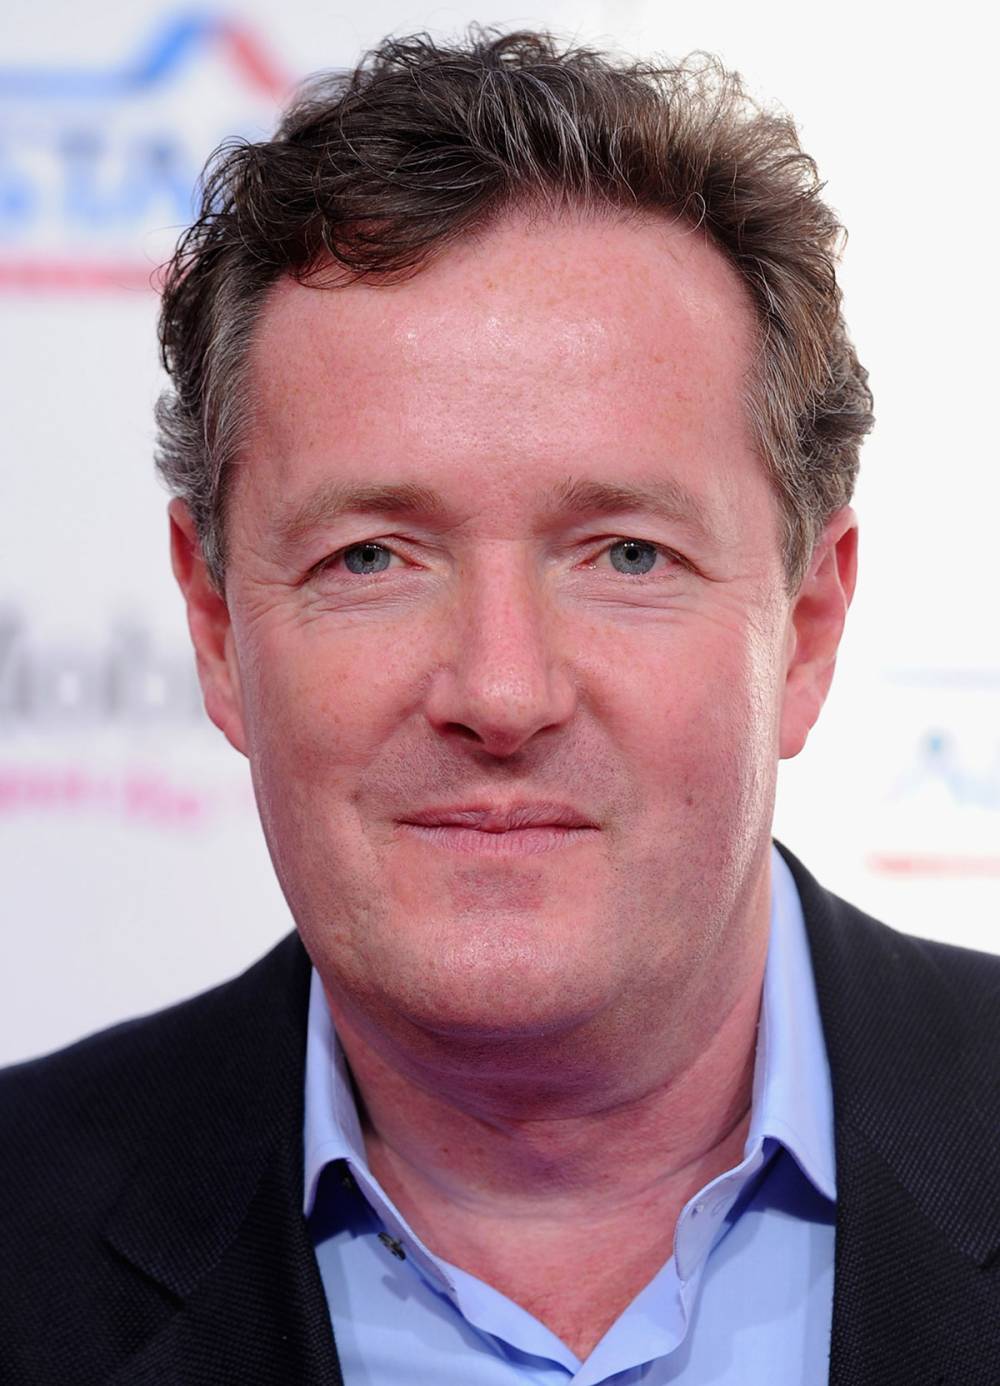 Outspoken Piers Morgan questioned Lady Gaga and Madonna's rape claims